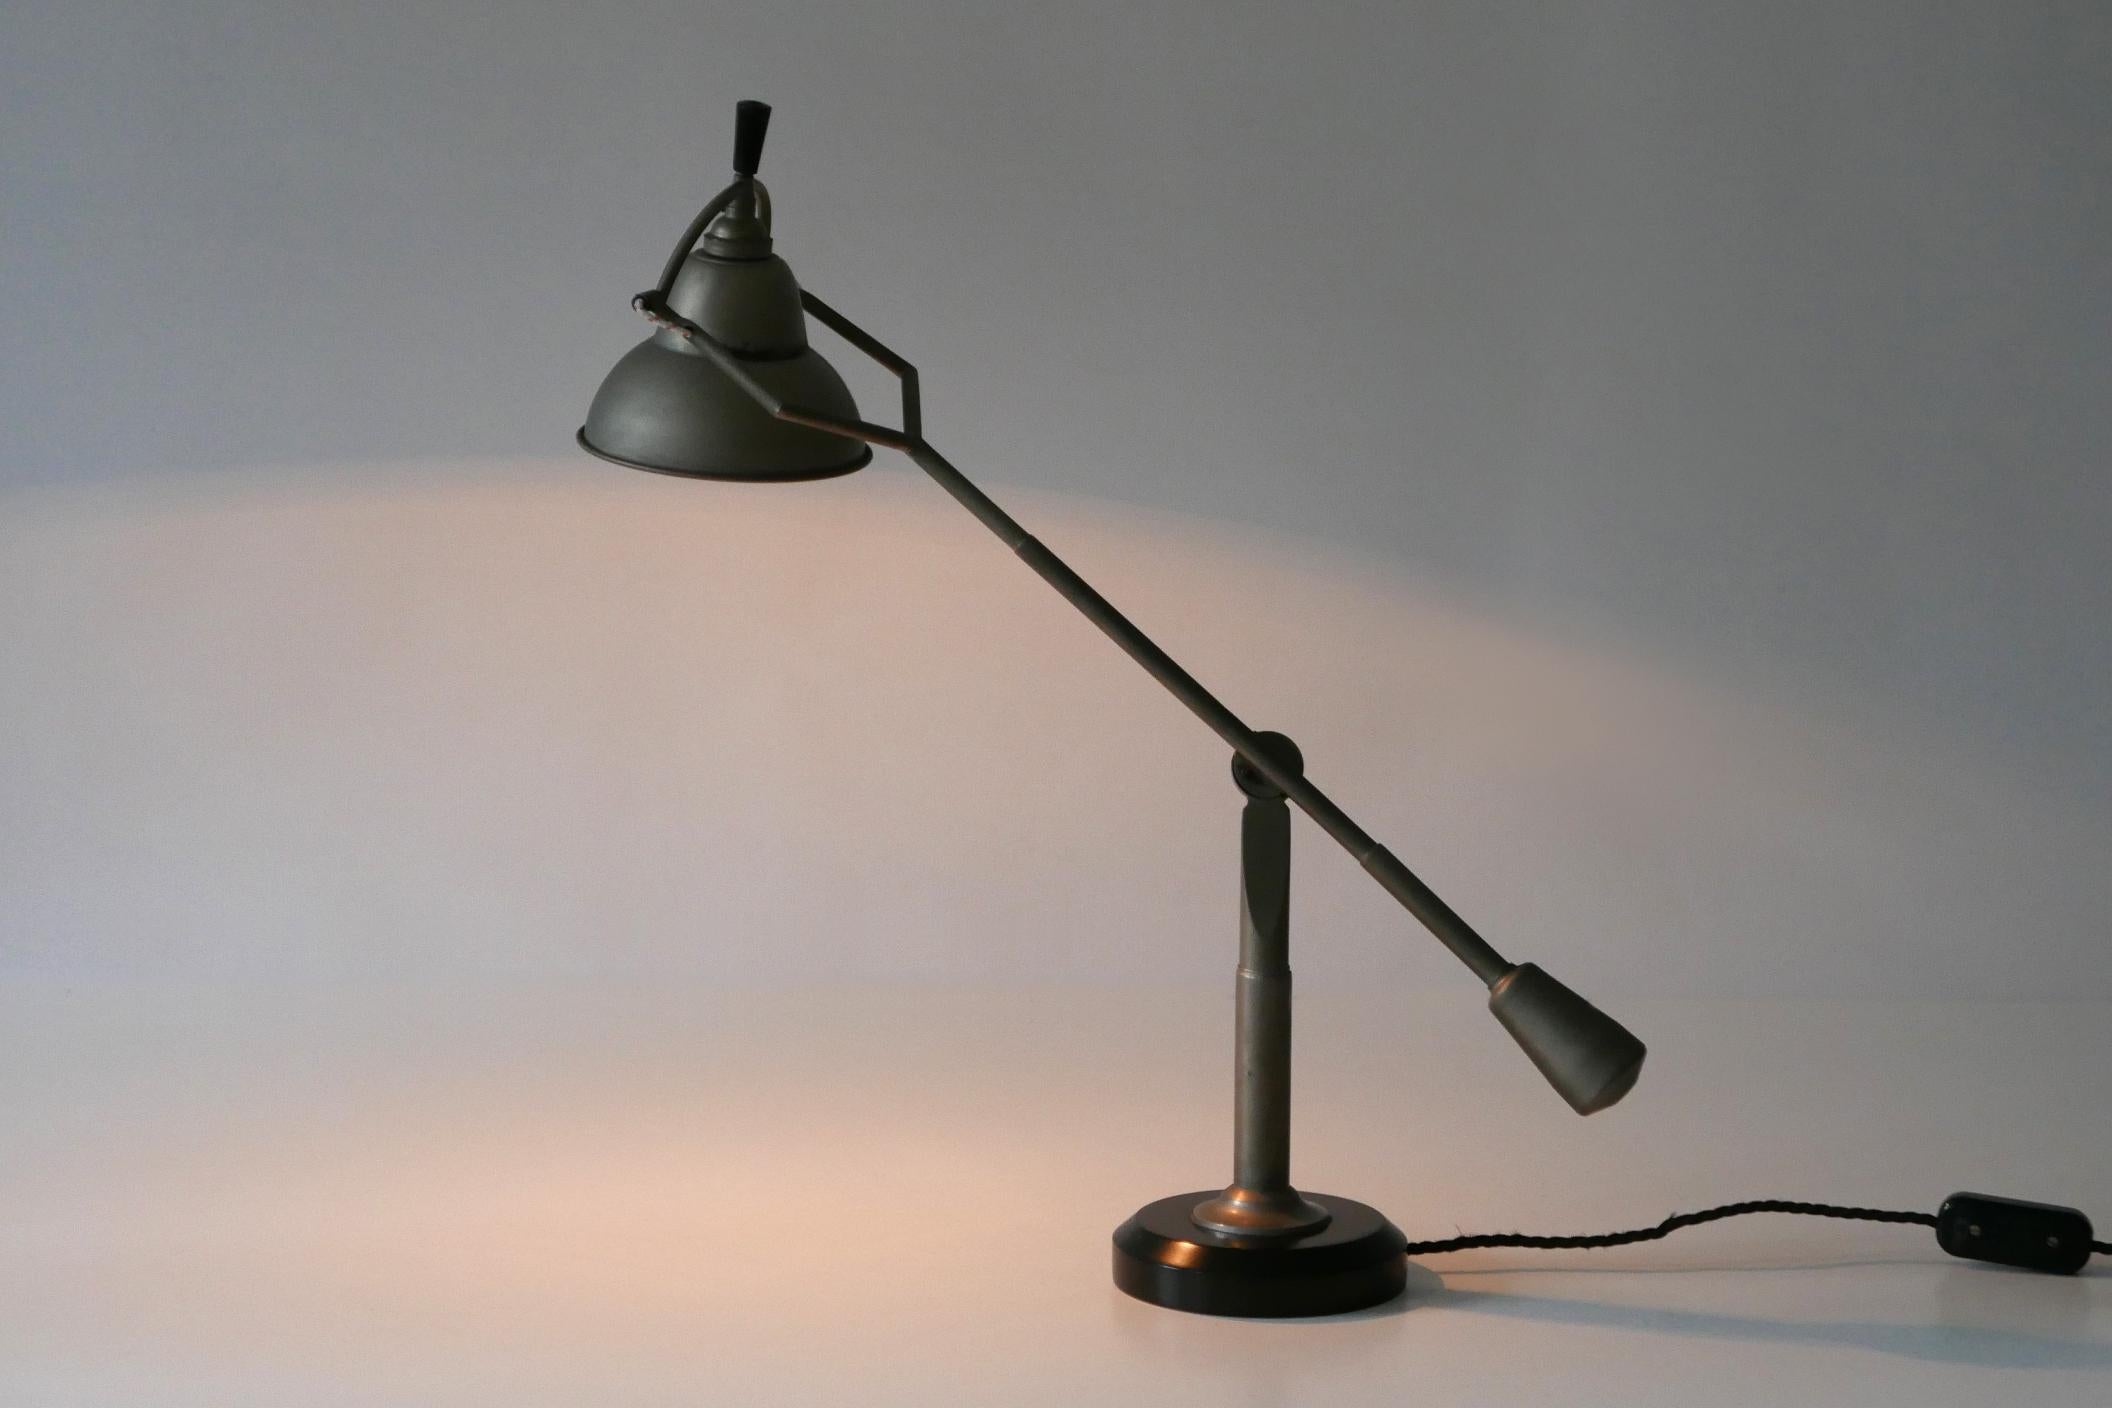 Iconic Art Deco counterbalance table lamp or desk light. Designed by Édouard-Wilfred Buquet, 1927, France. This example must have been produced in 1960s-1970s in Munich, Germany. Quality work. Metal label to underside.

The lamp comes with an extra